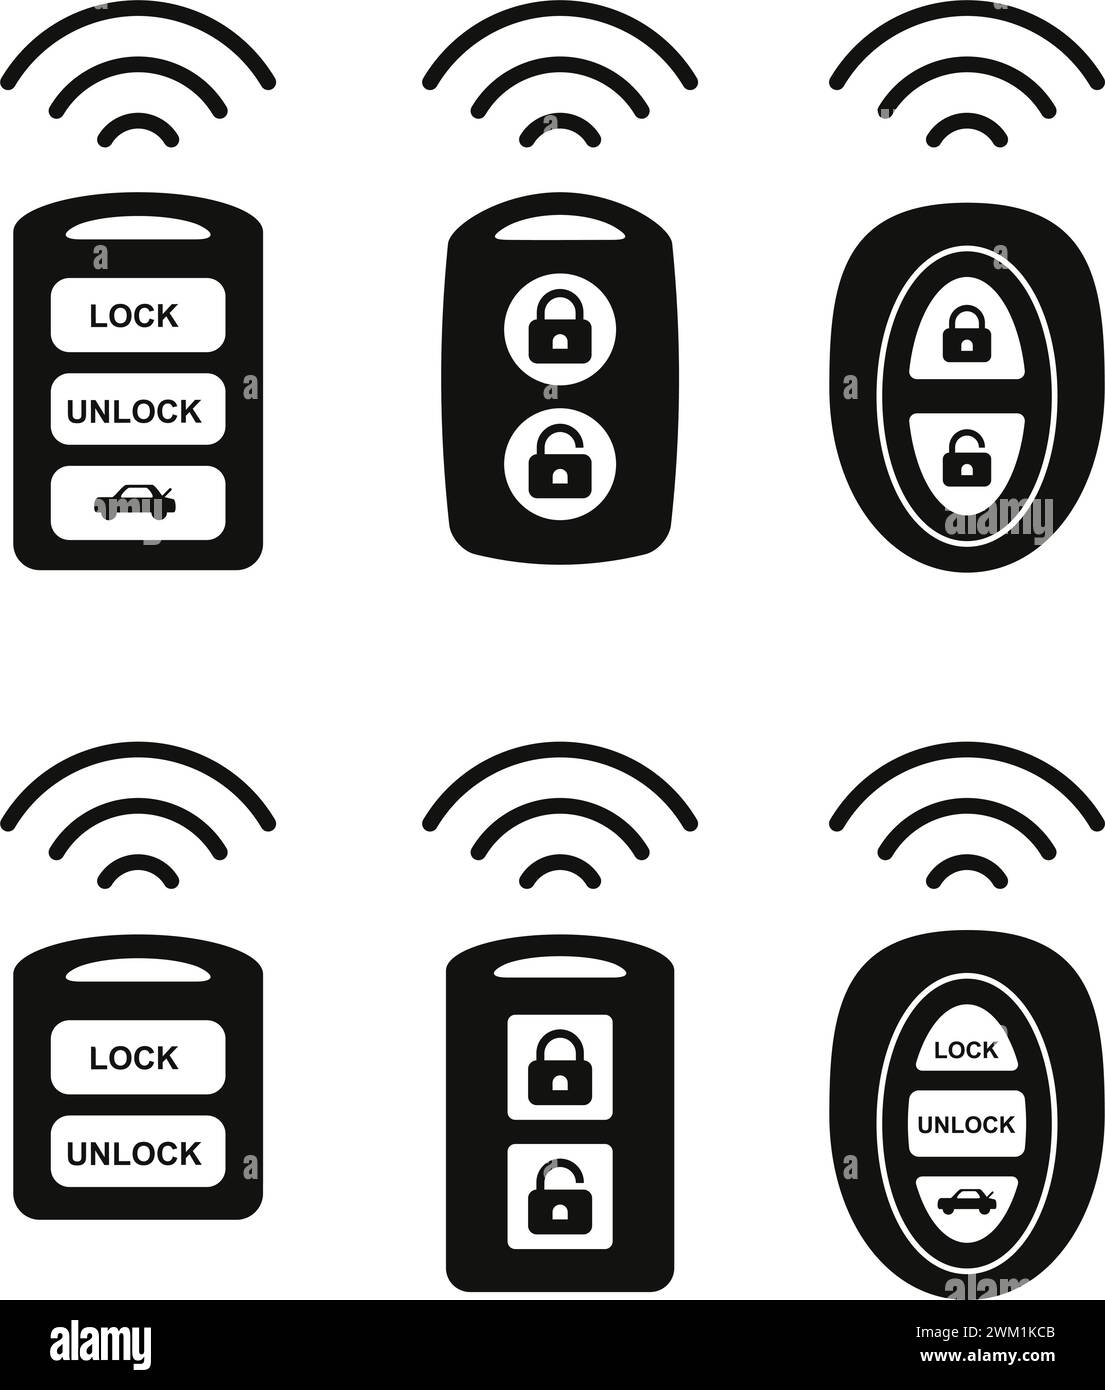 vector car alarm remote control key icons. car alarm system pictogram set. car key fobs isolated on white background Stock Vector